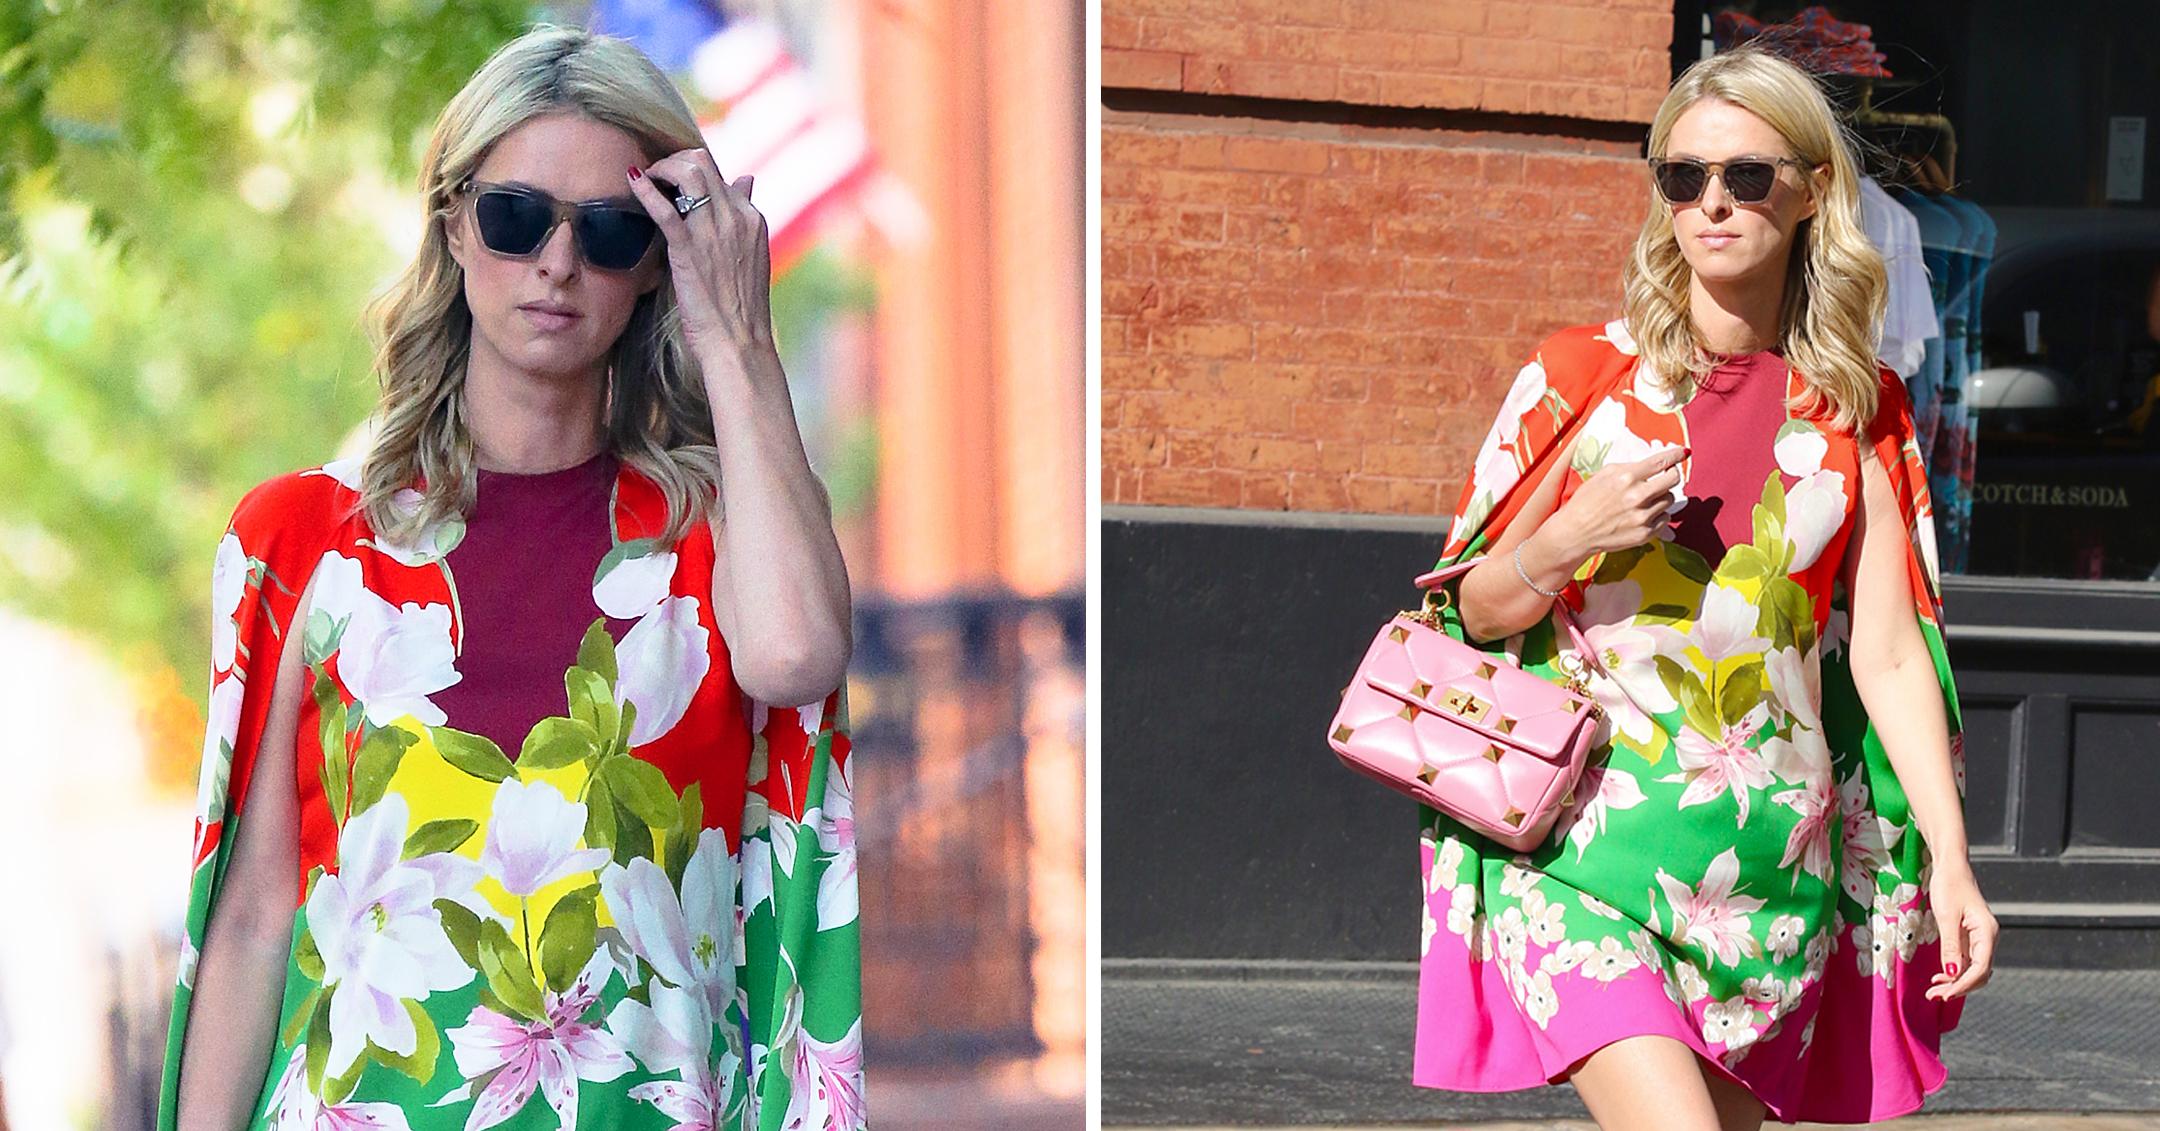 Nicky Hilton wears a floral print summer dress accessorized with a silver Chanel  handbag while out and about in New York City Featuring: Nicky Hilton Where:  New York City, New York, United